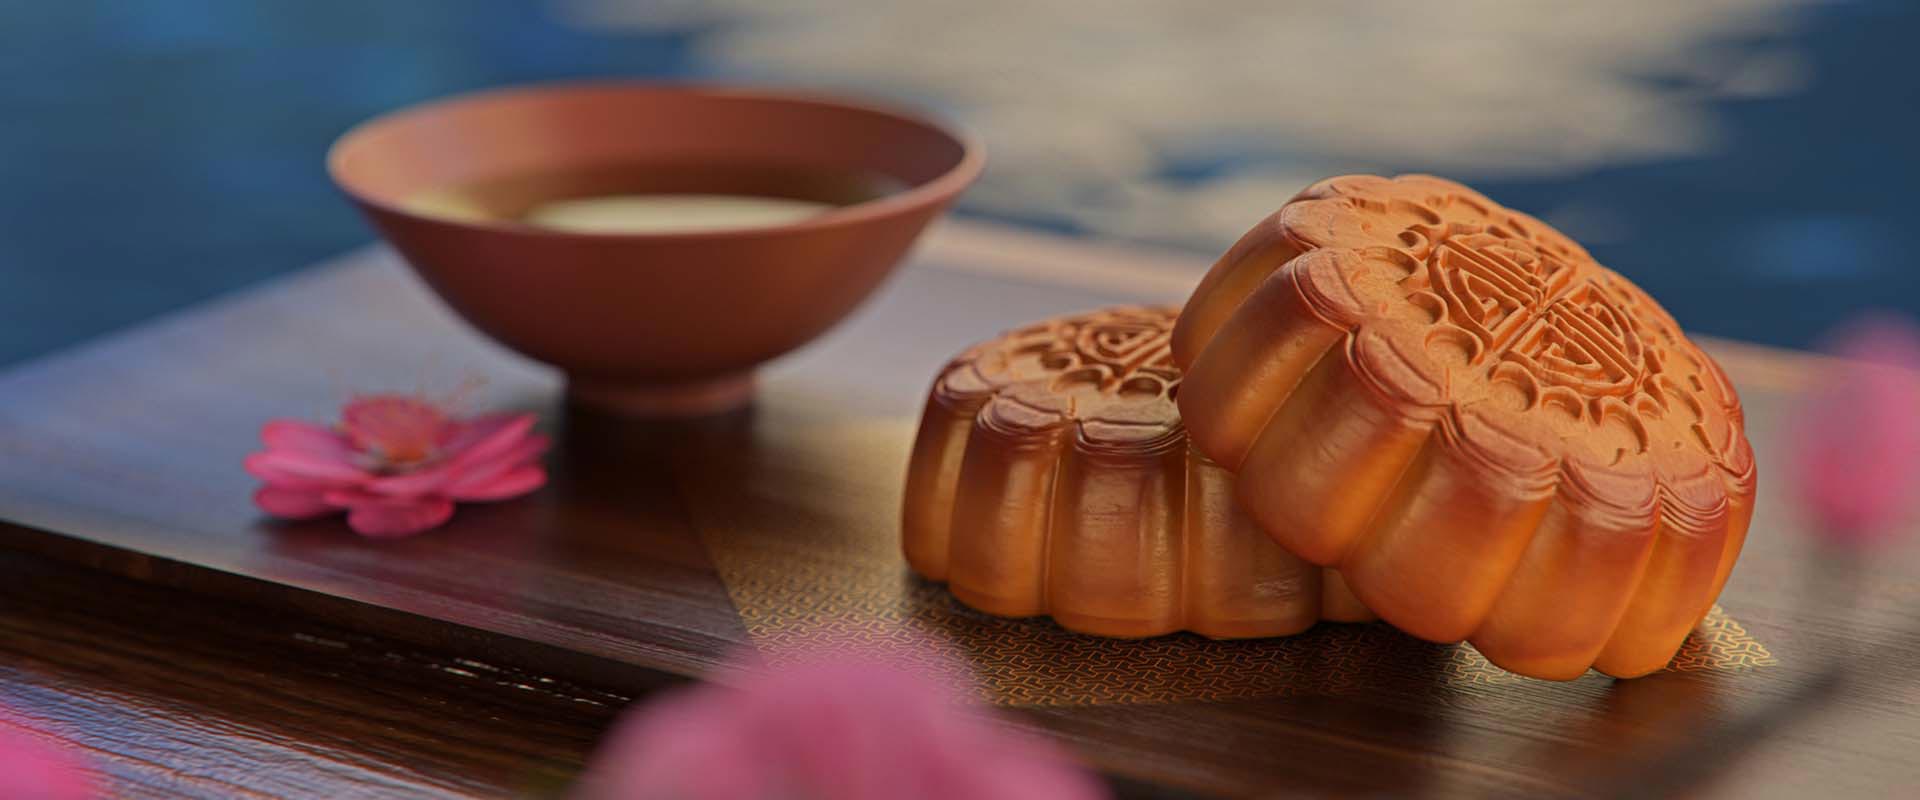 Date 2021 mooncake festival Chinese Mid